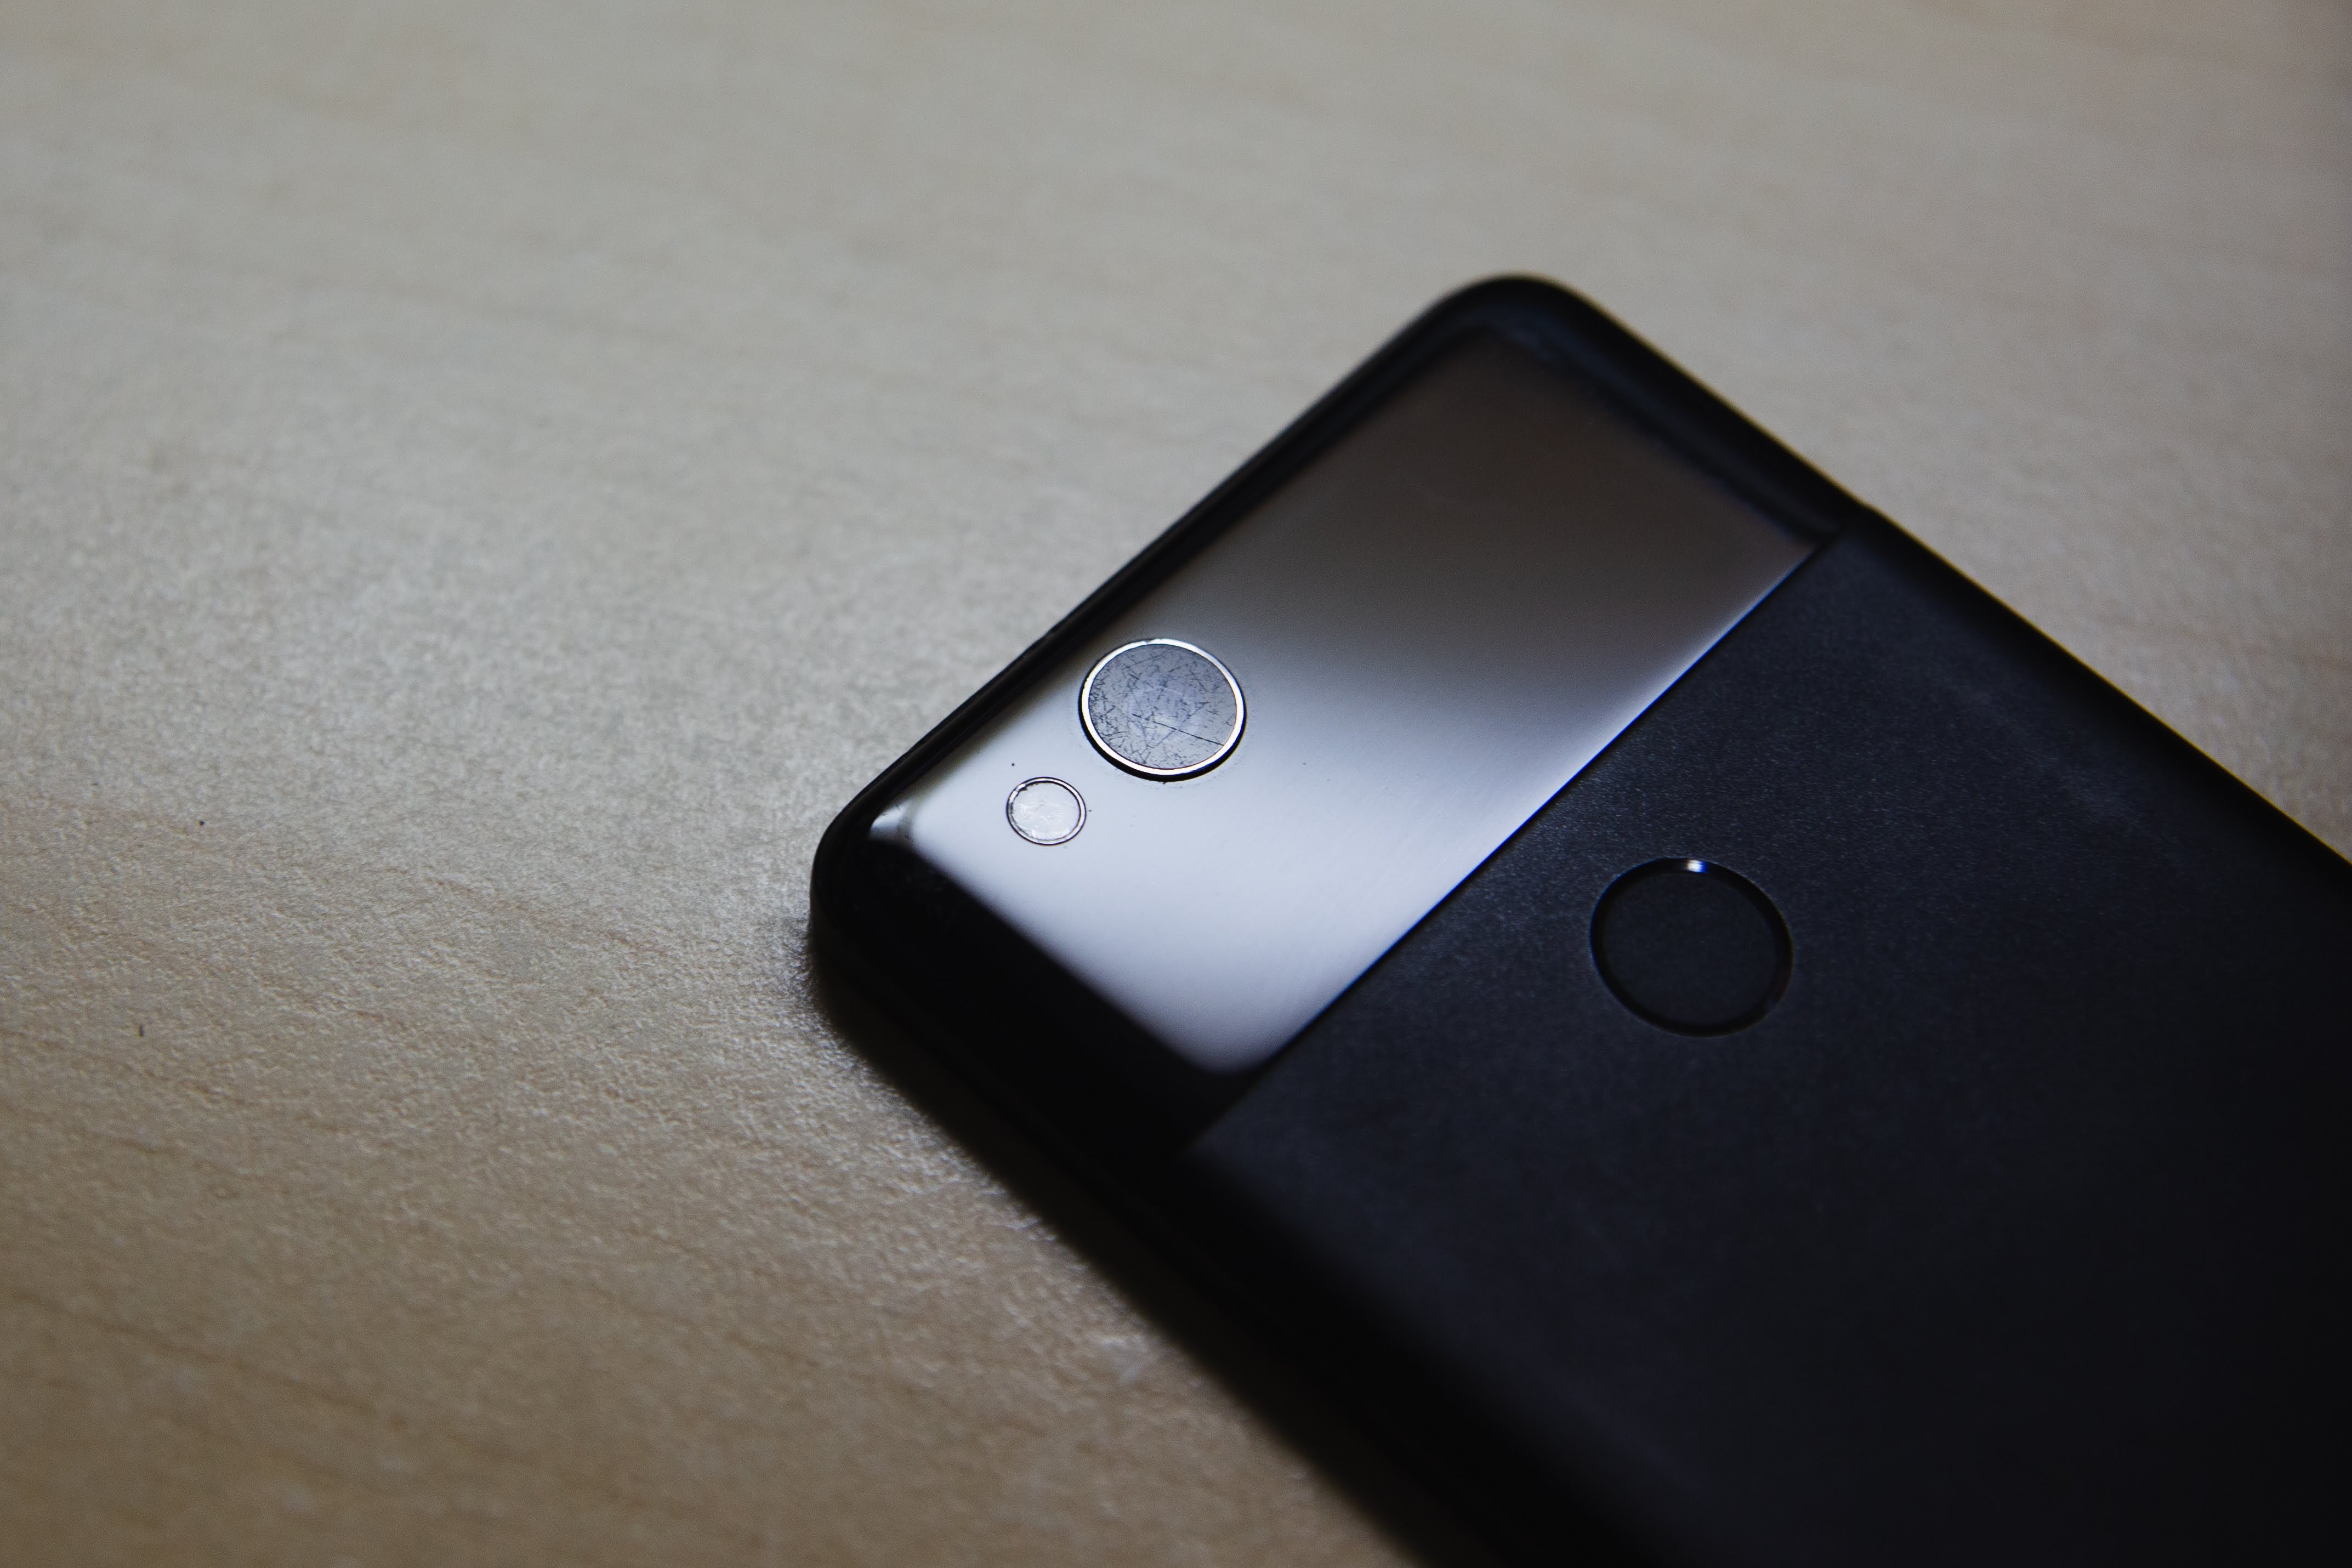 Decommission Review: My Farewell to Pixel 2 and Android